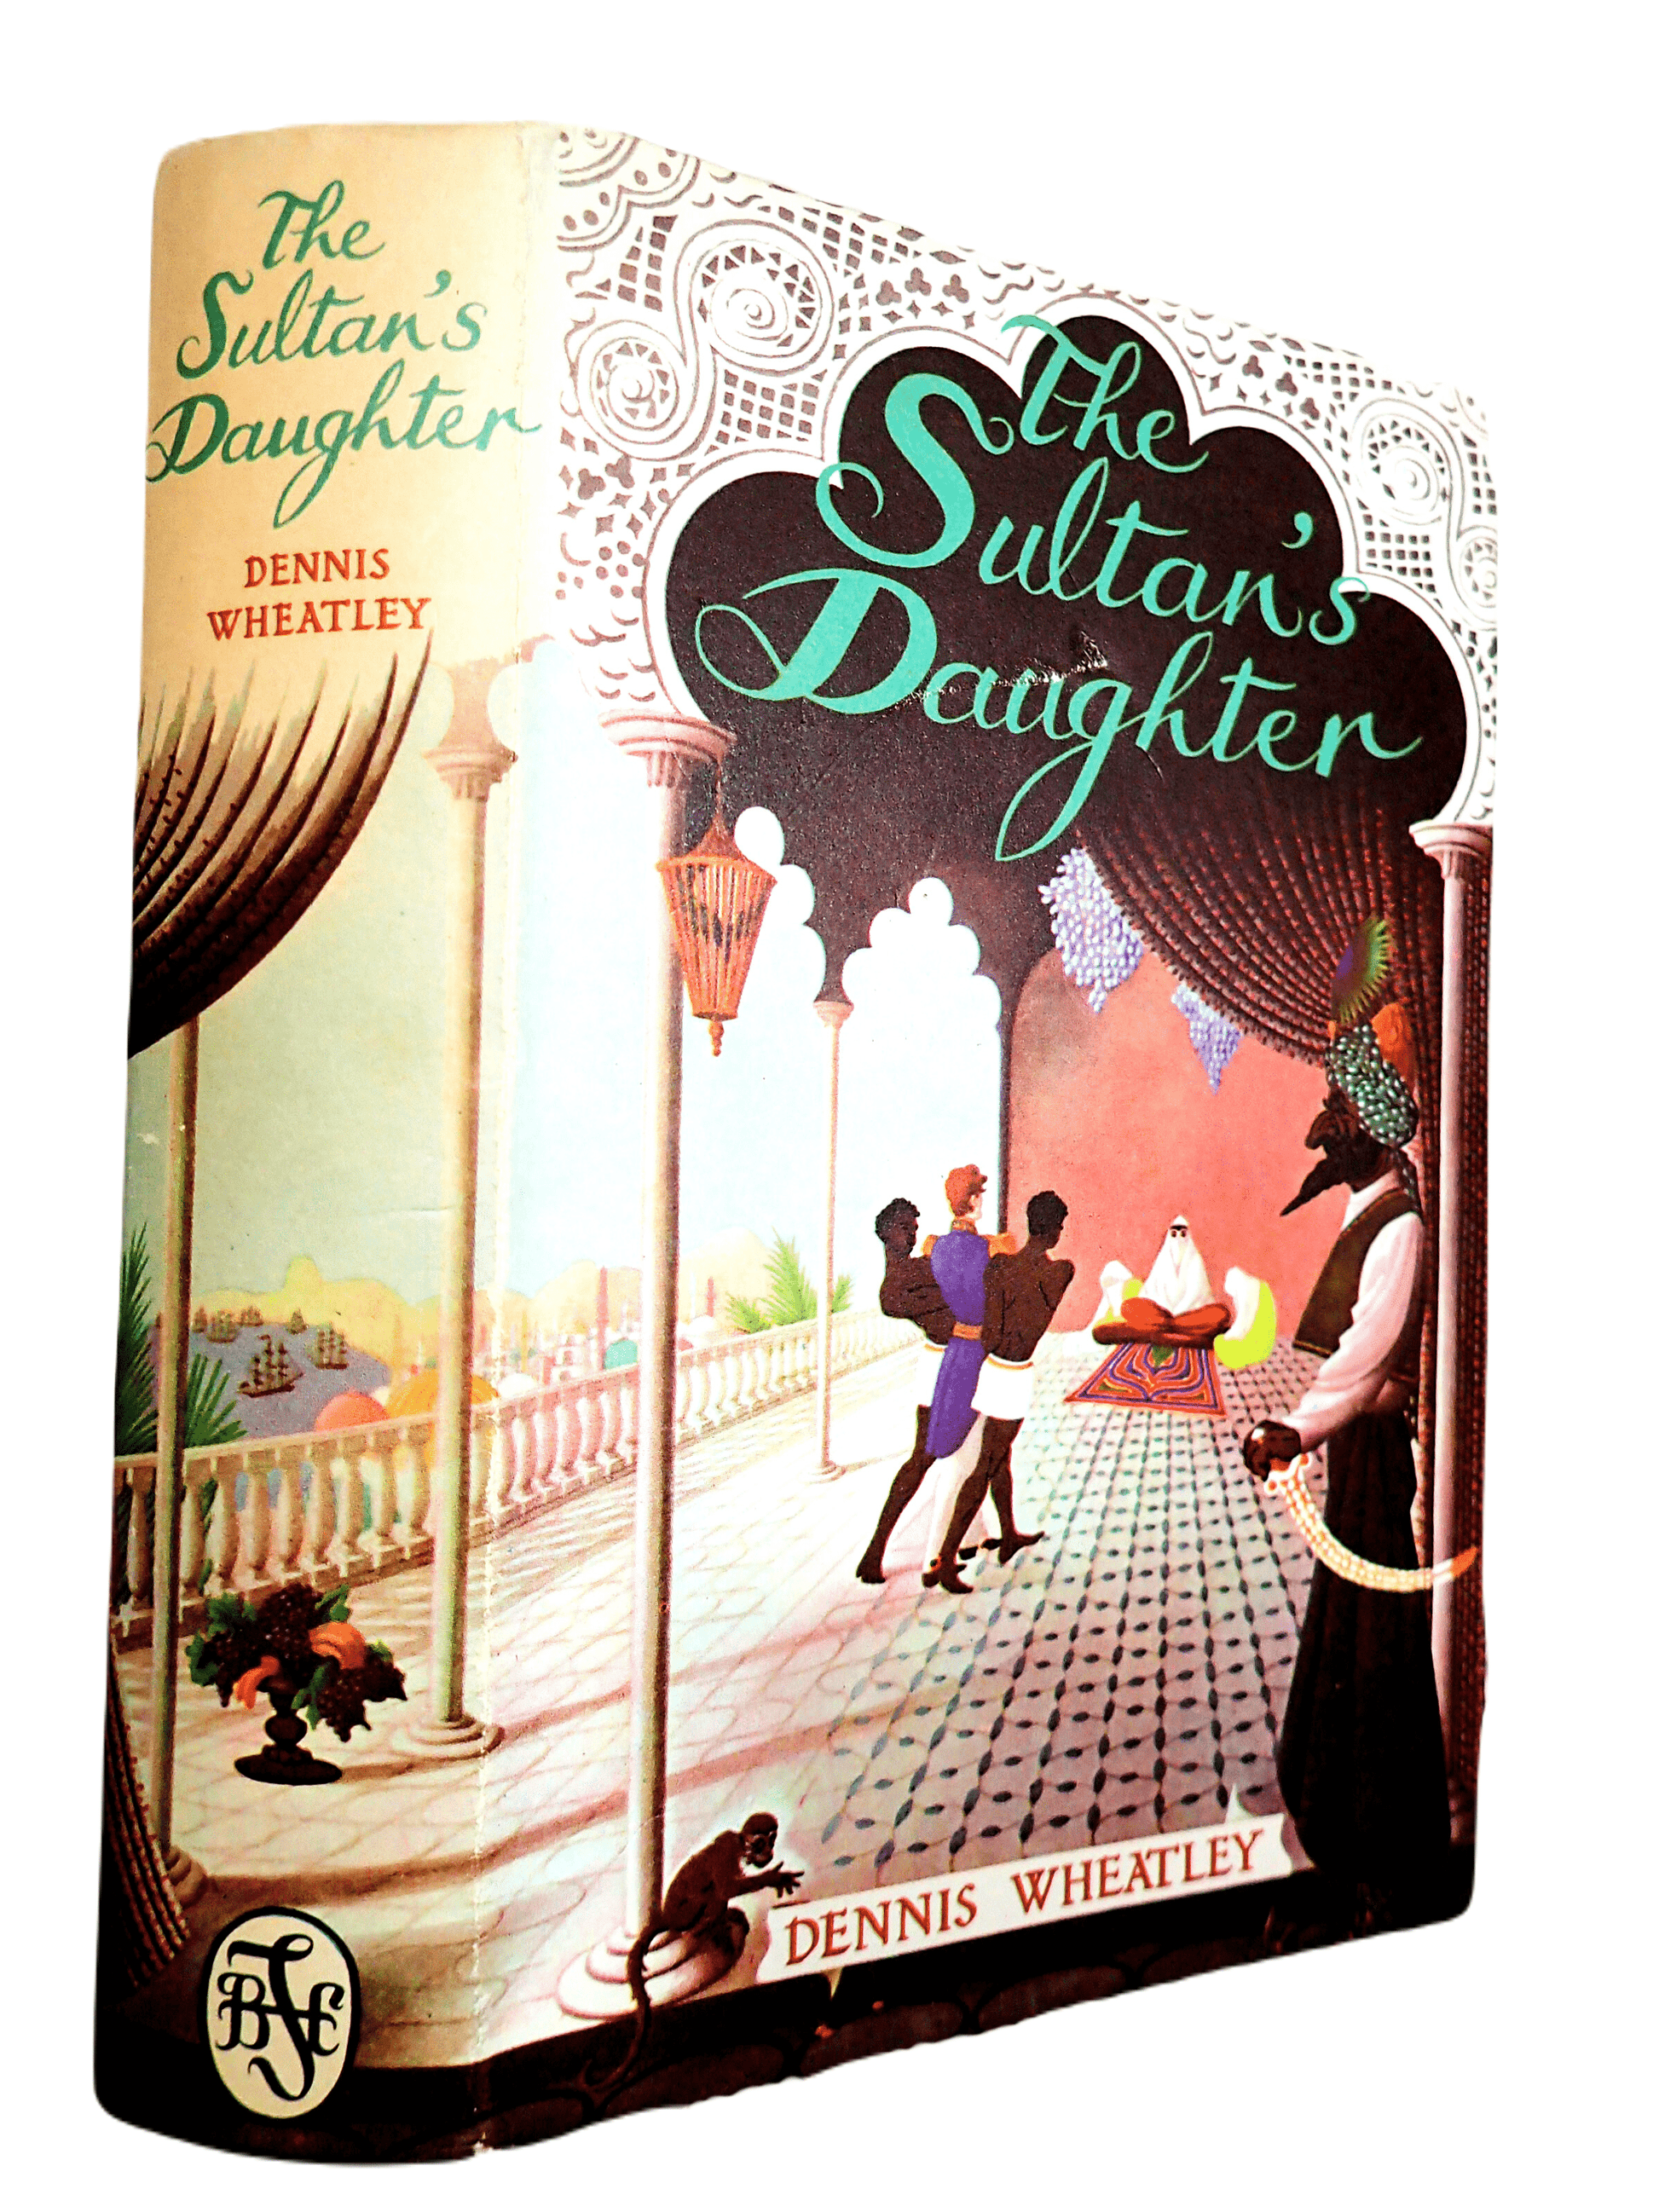 Front cover of The Sultans Daughter Dennis Wheatley Vintage Book BCA Showing a man in a turban and a monkey. 